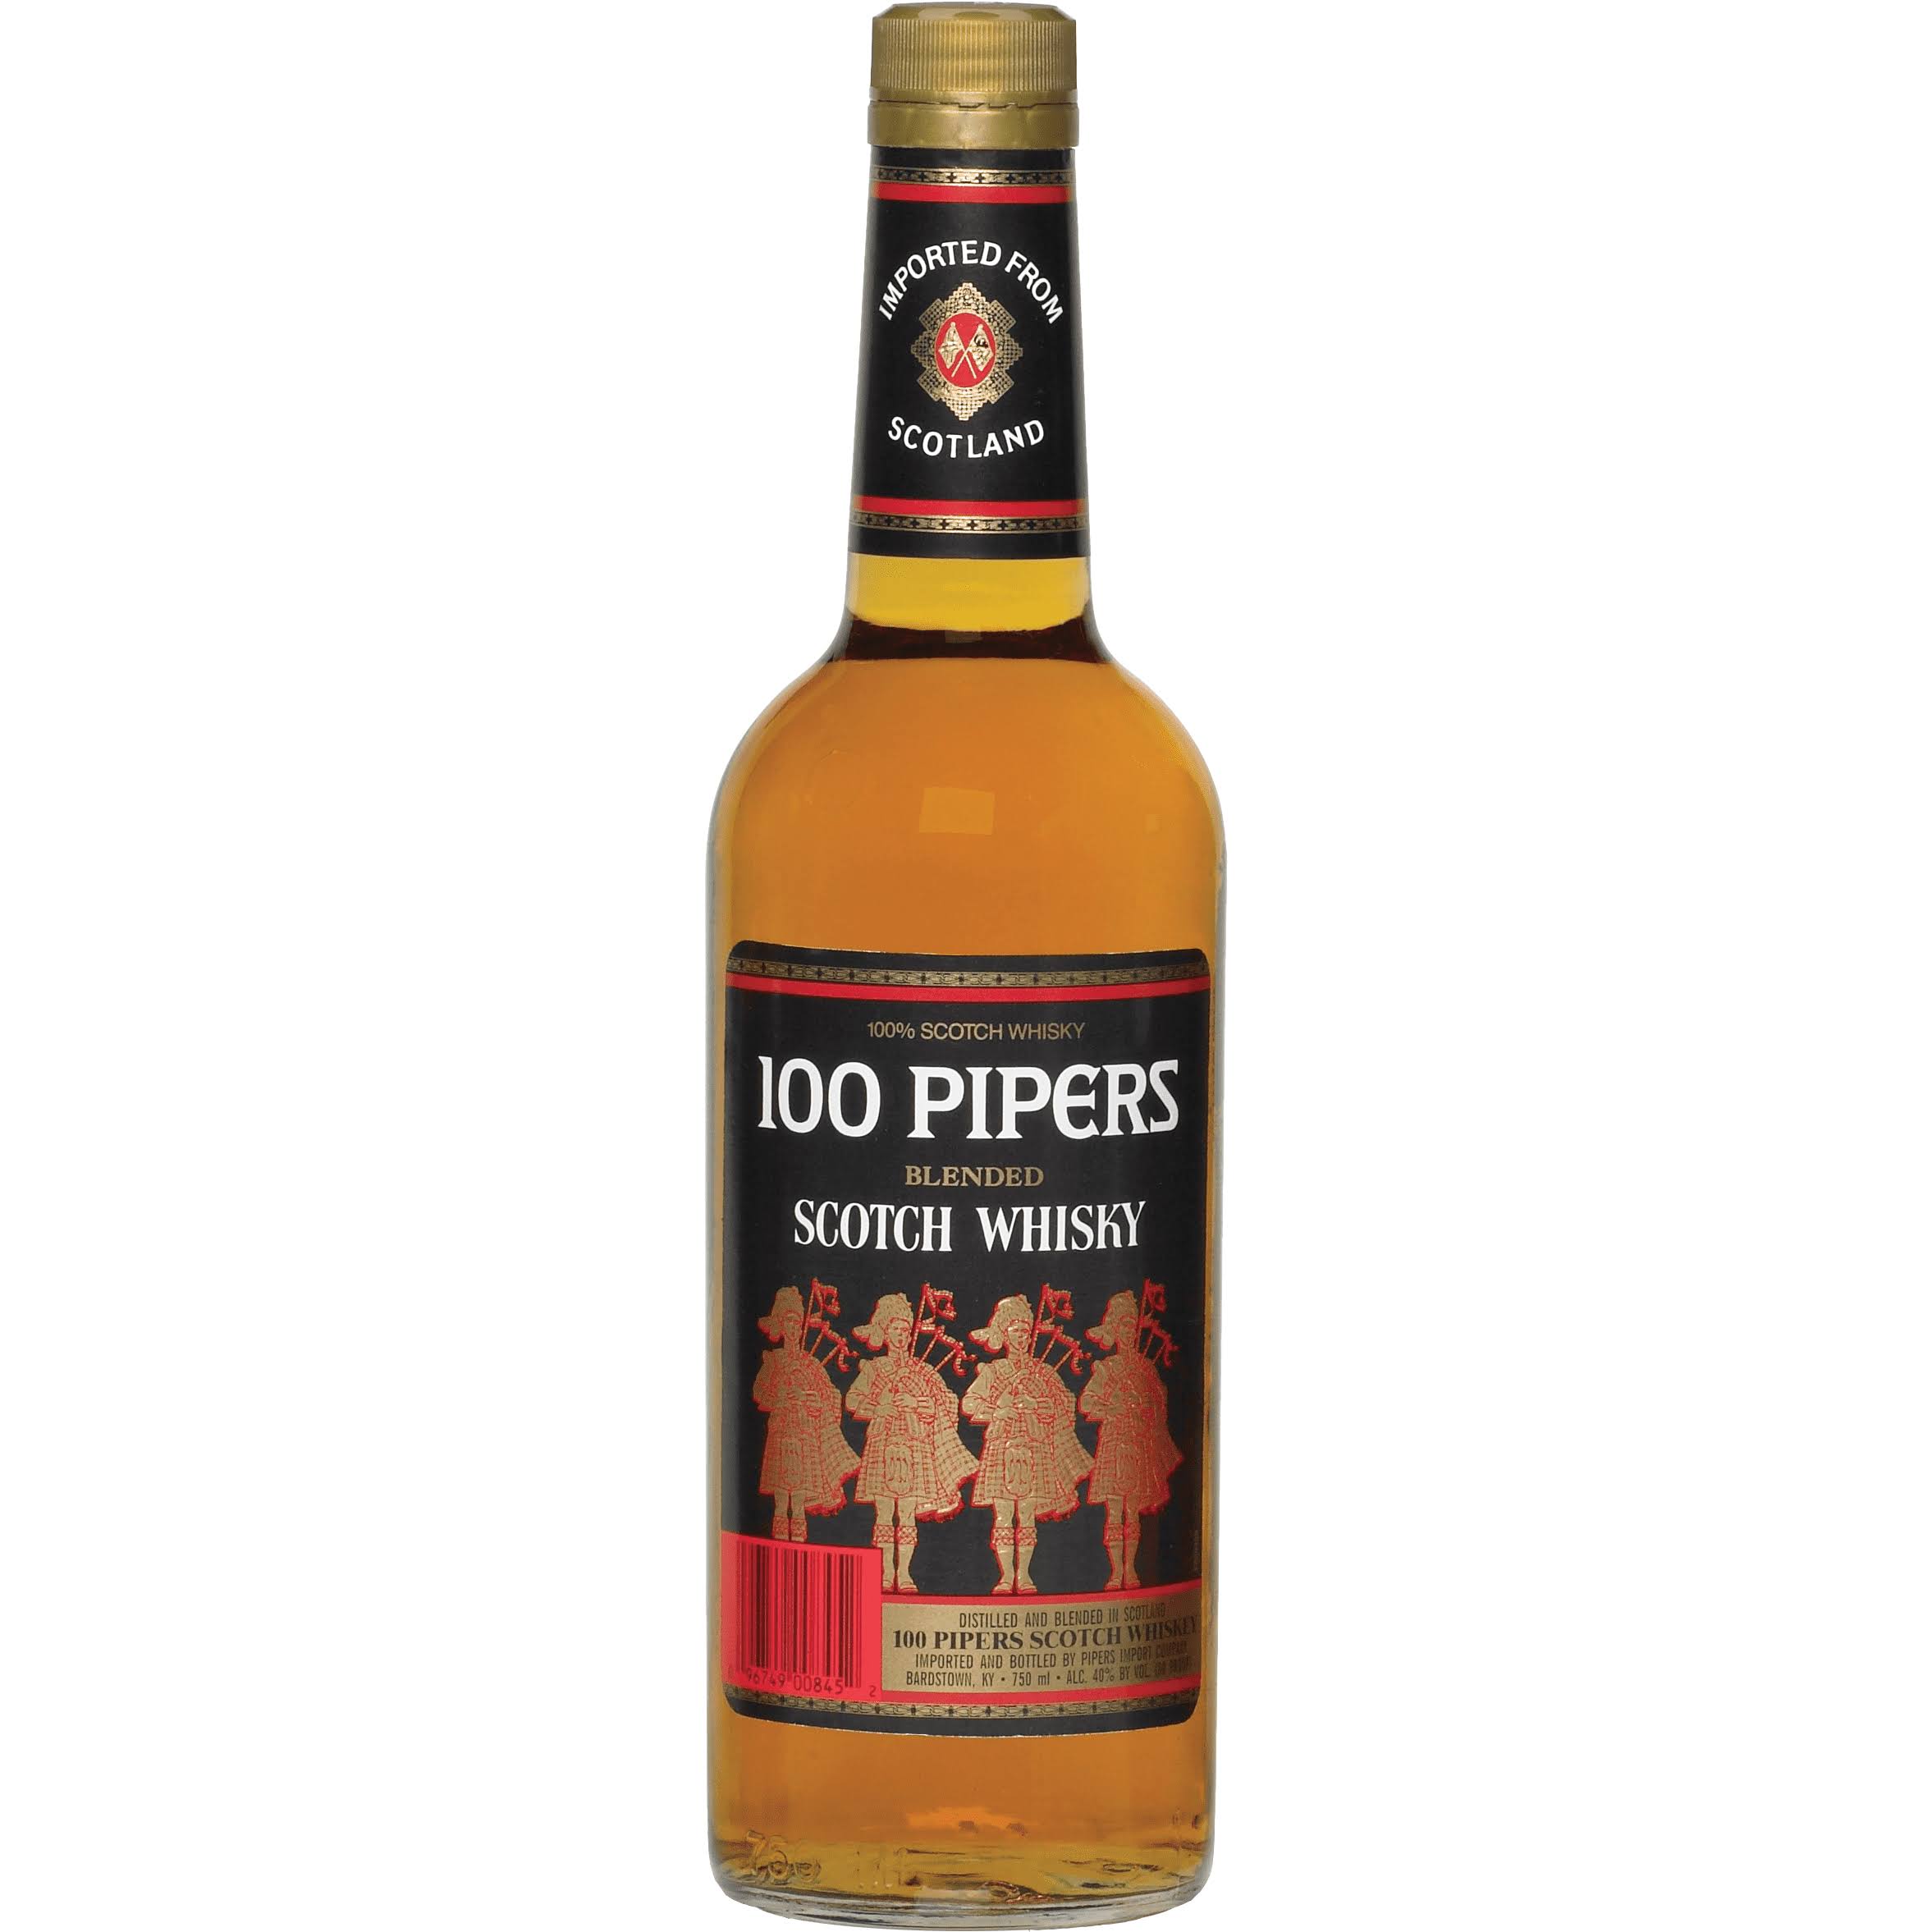 100 Pipers Blended Scotch Whisky 750ml